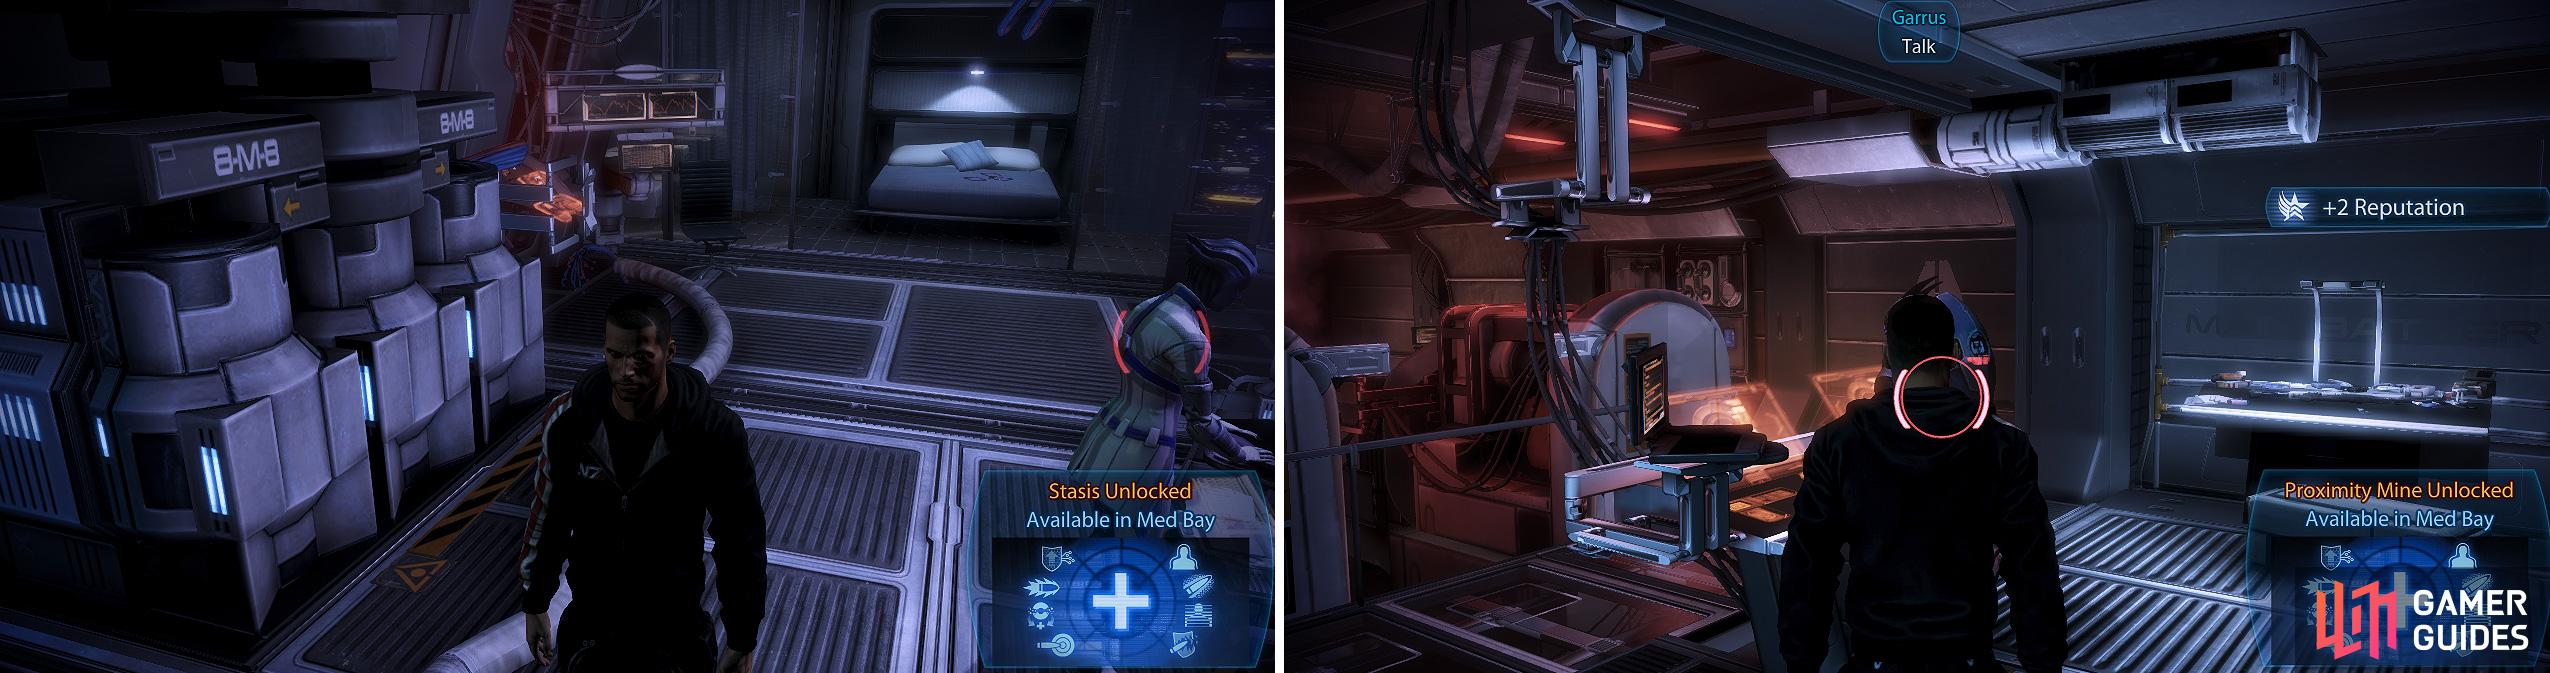 Speaking to Garrus unlocks his Proximity Mine skill provided you've diligently spoken to him between missions (right) as well as Liara's Stasis skill (left).